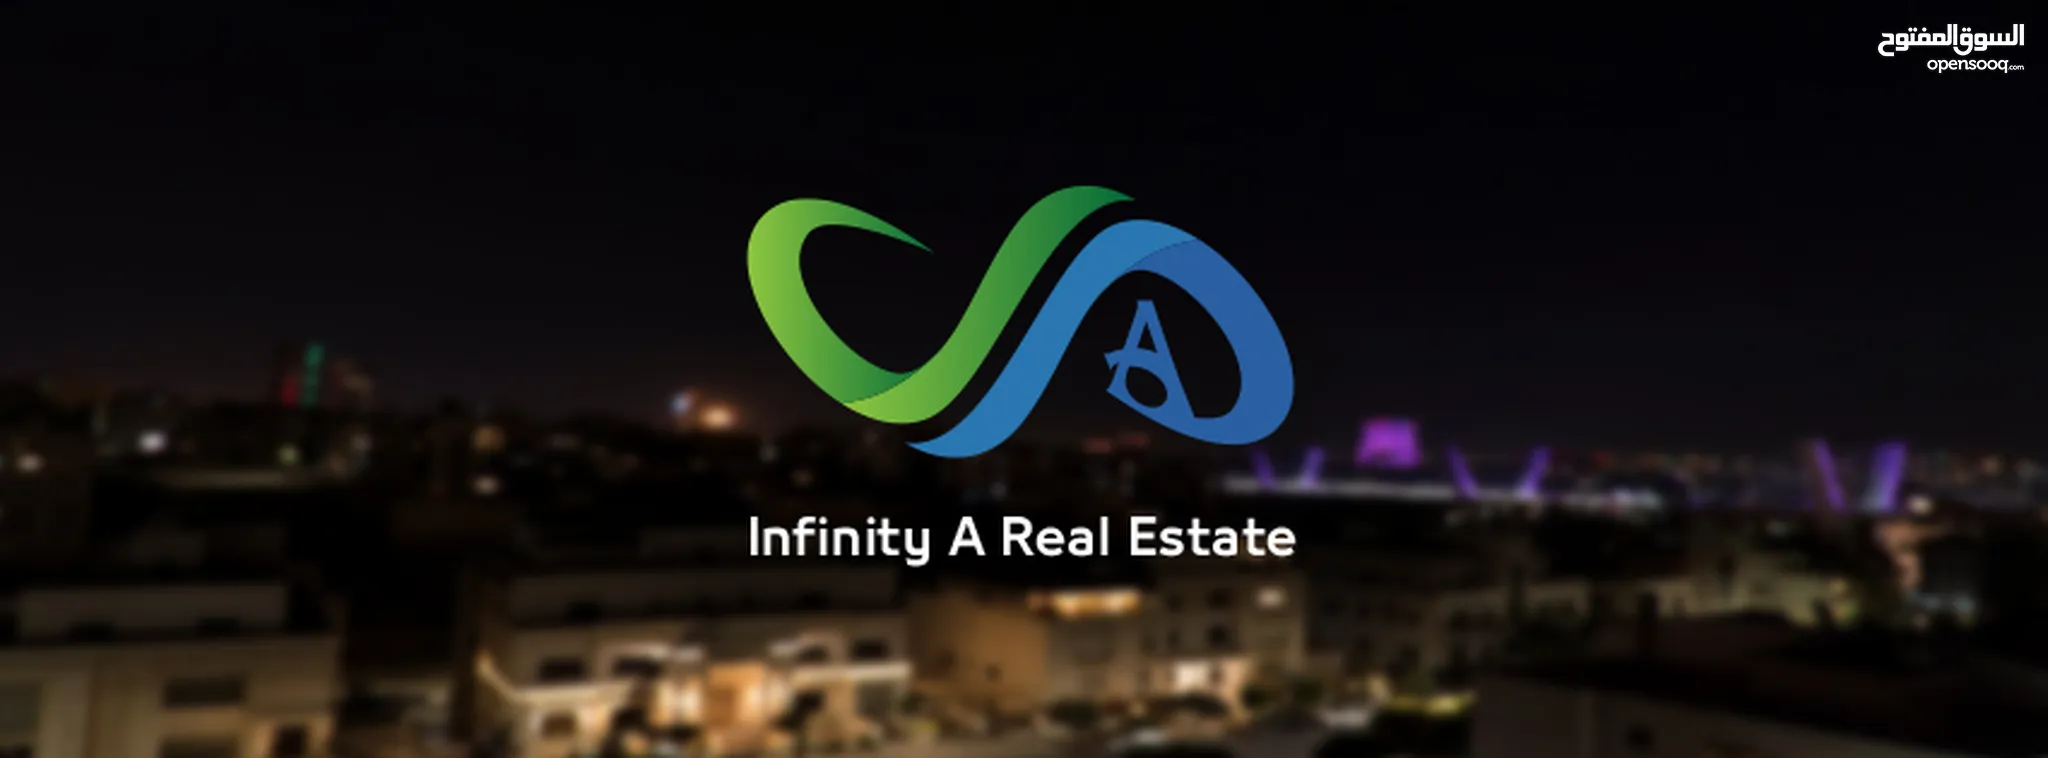 Infinity A Real Estate 